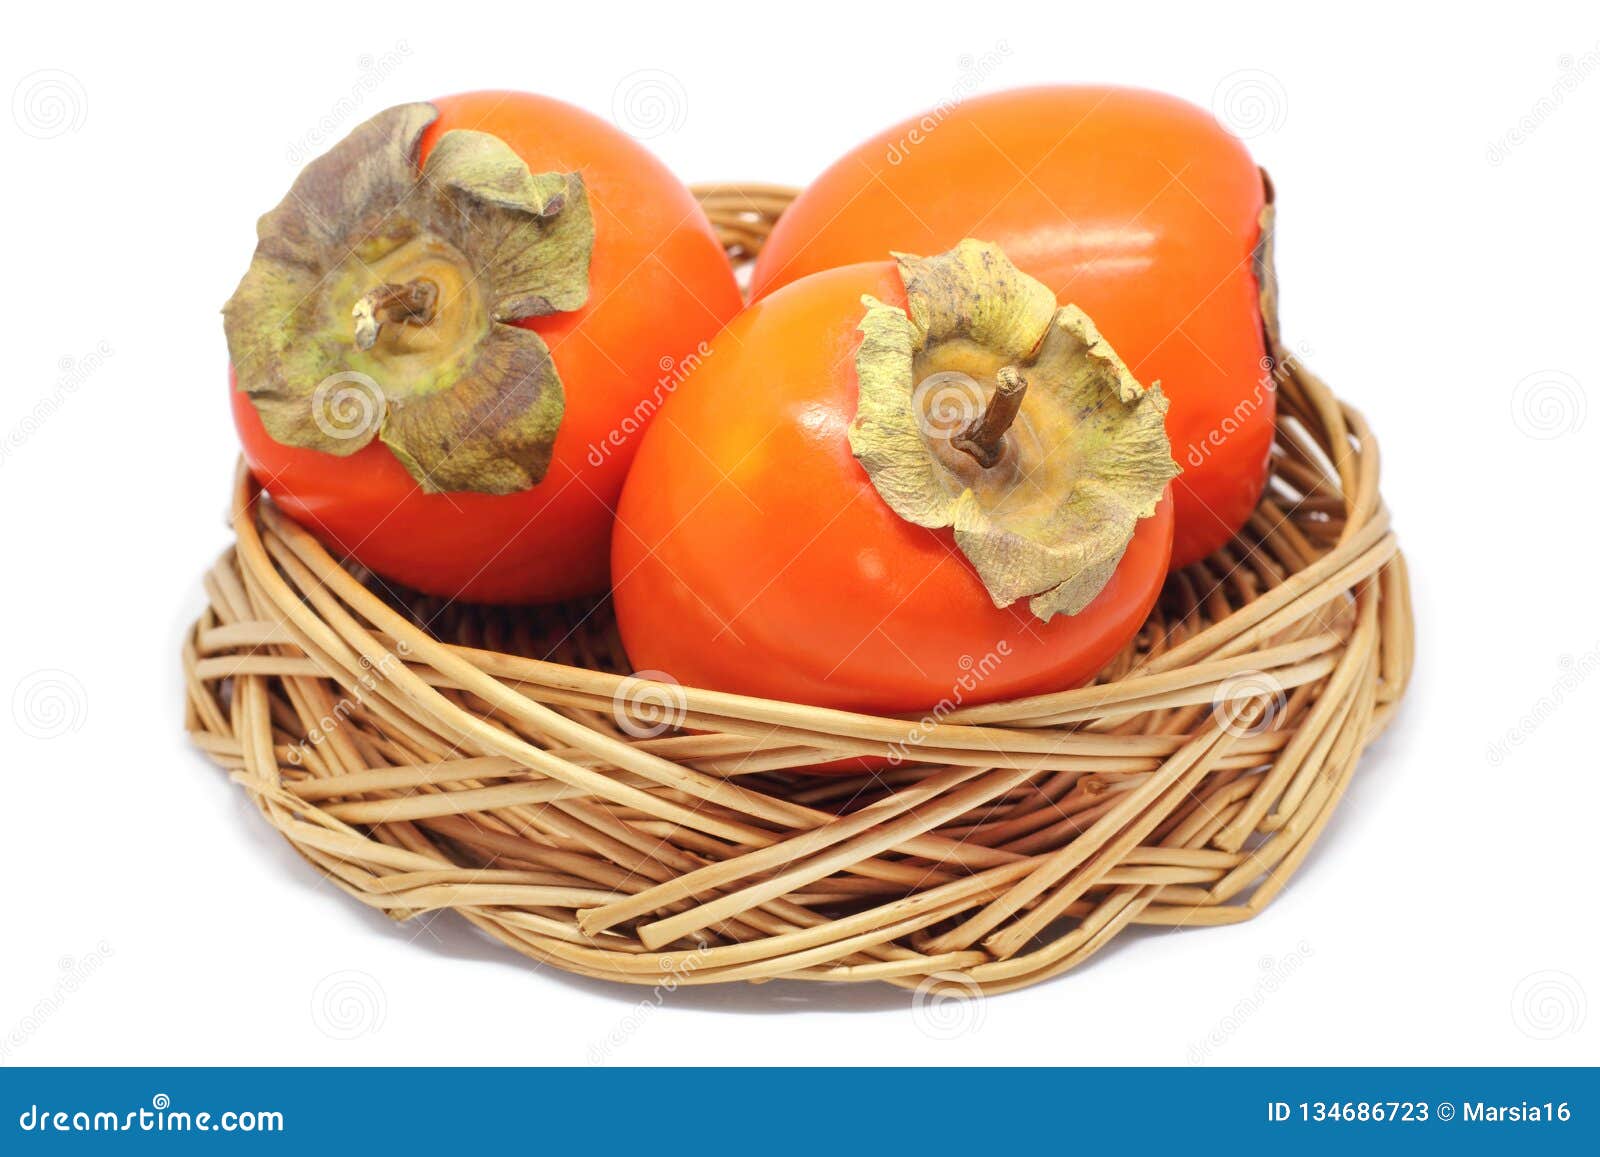 three persimmons in a wicker bowl  on white